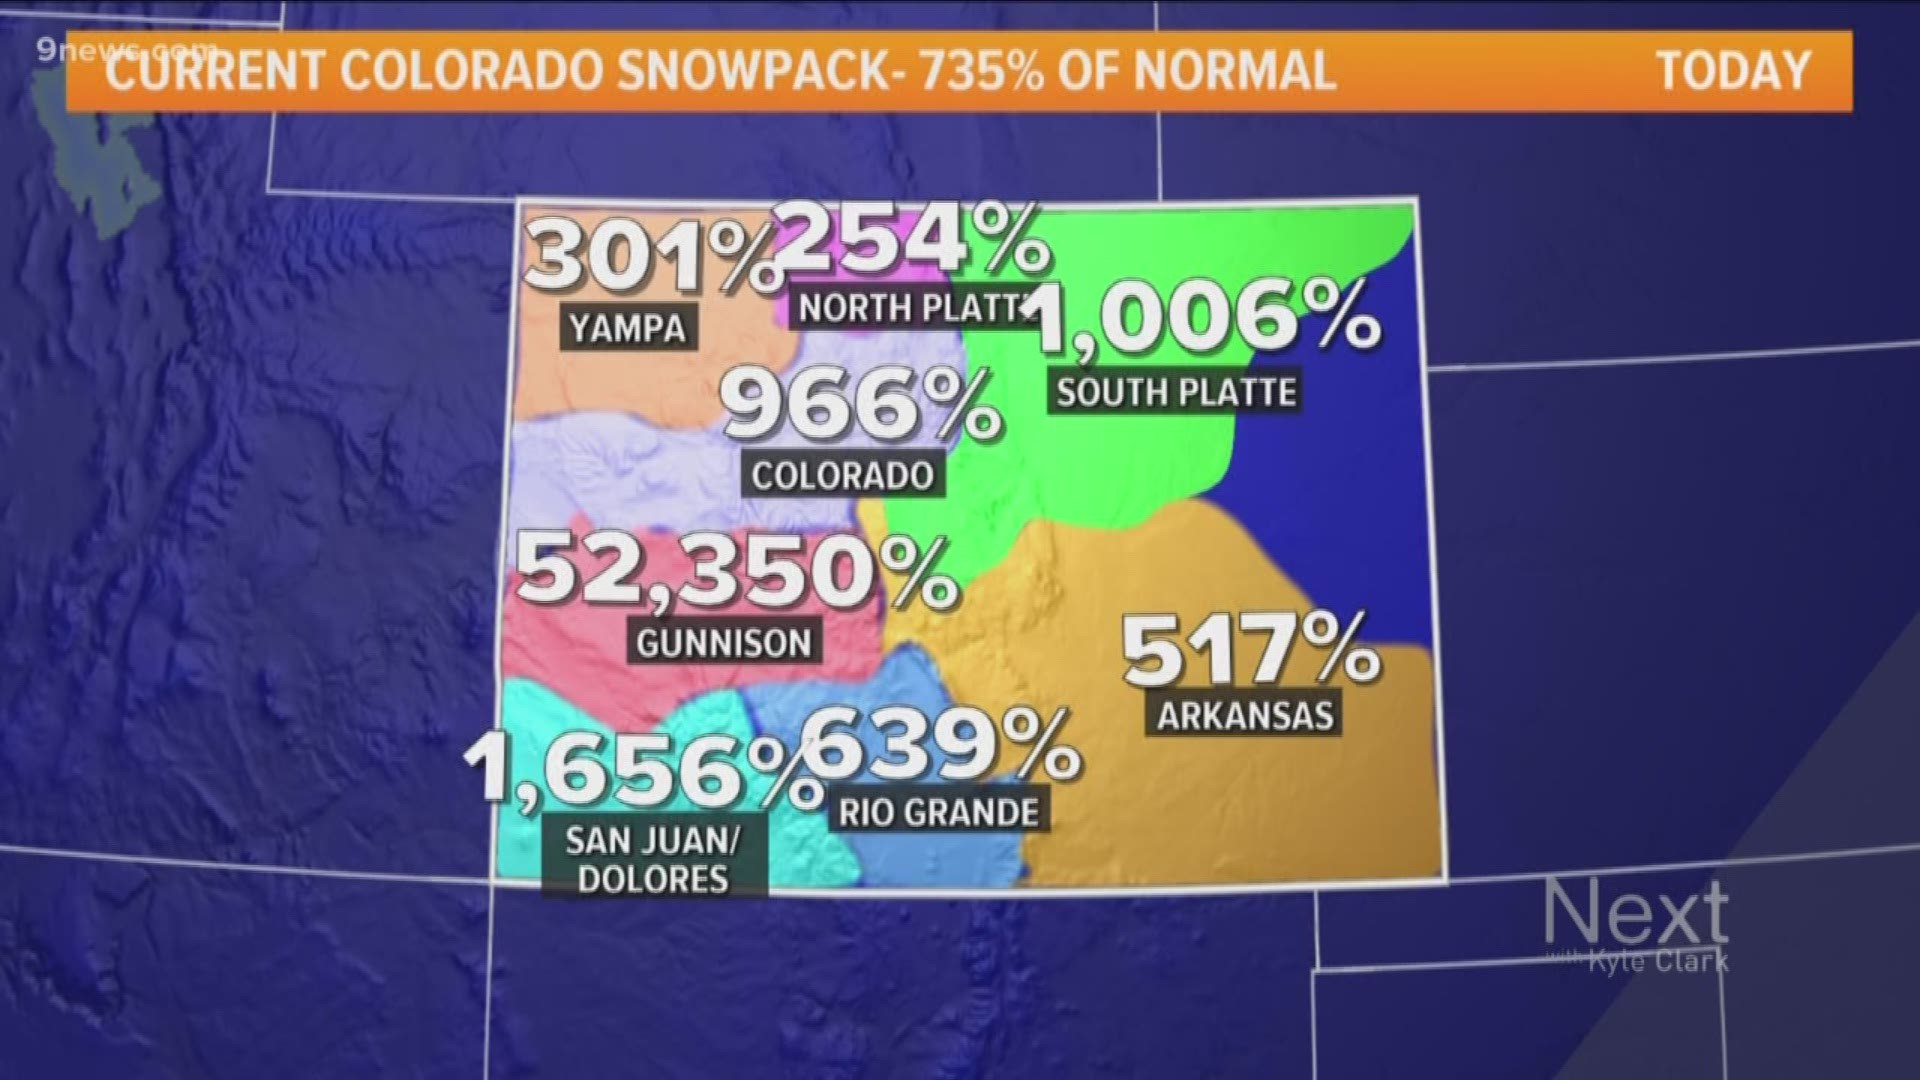 It sounds absurd, but it's accurate. The snowpack is bonkers right now because Gunnison still has almost 9 inches of snow.